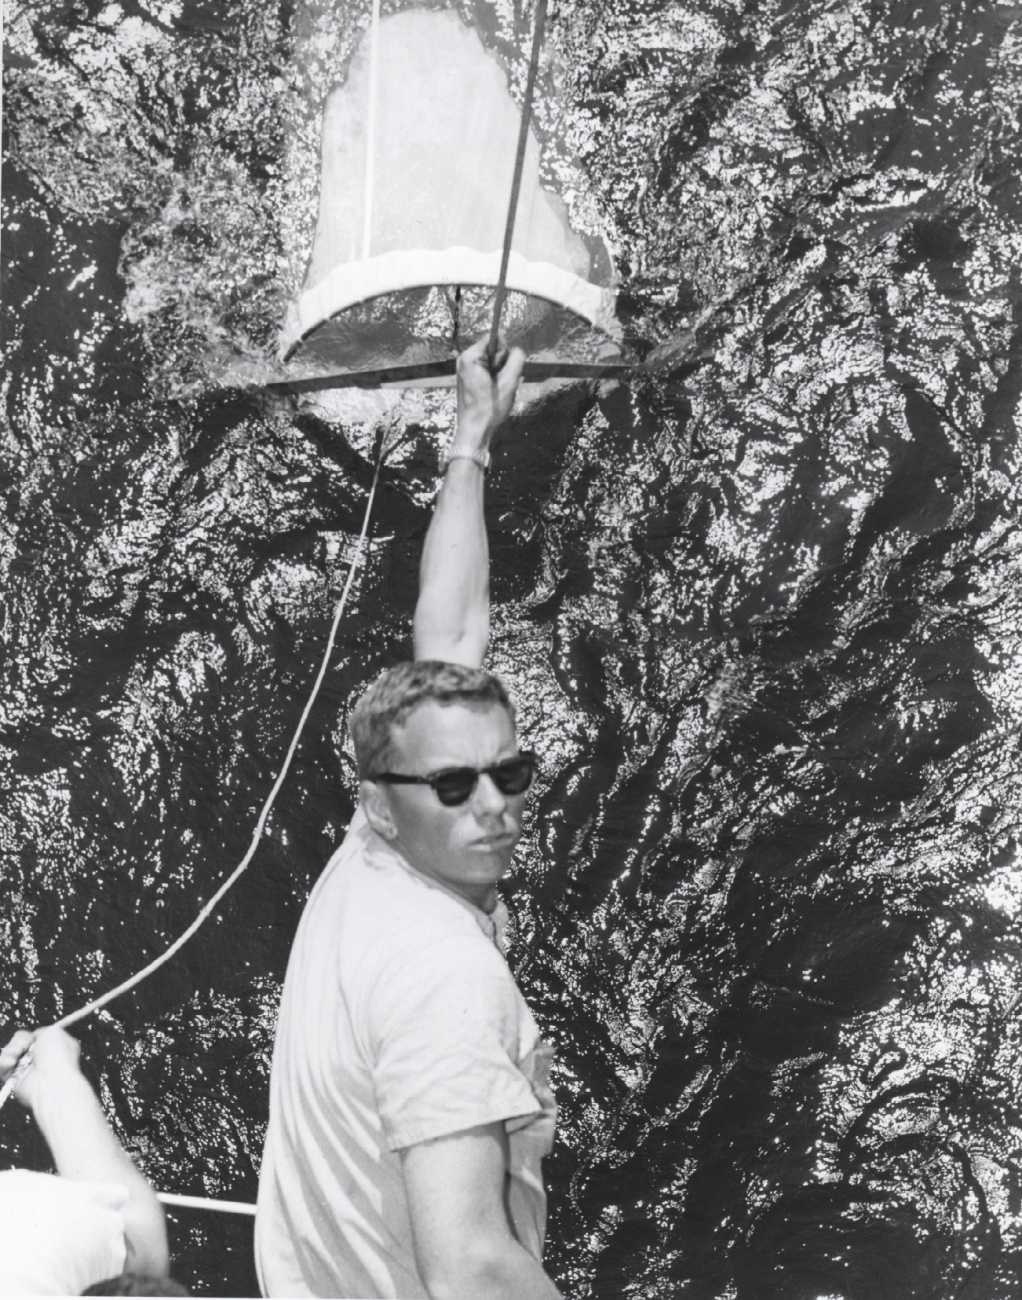 Plankton net recovery on board USC&GS; OCEANOGRAPHER during its 1967global expedition